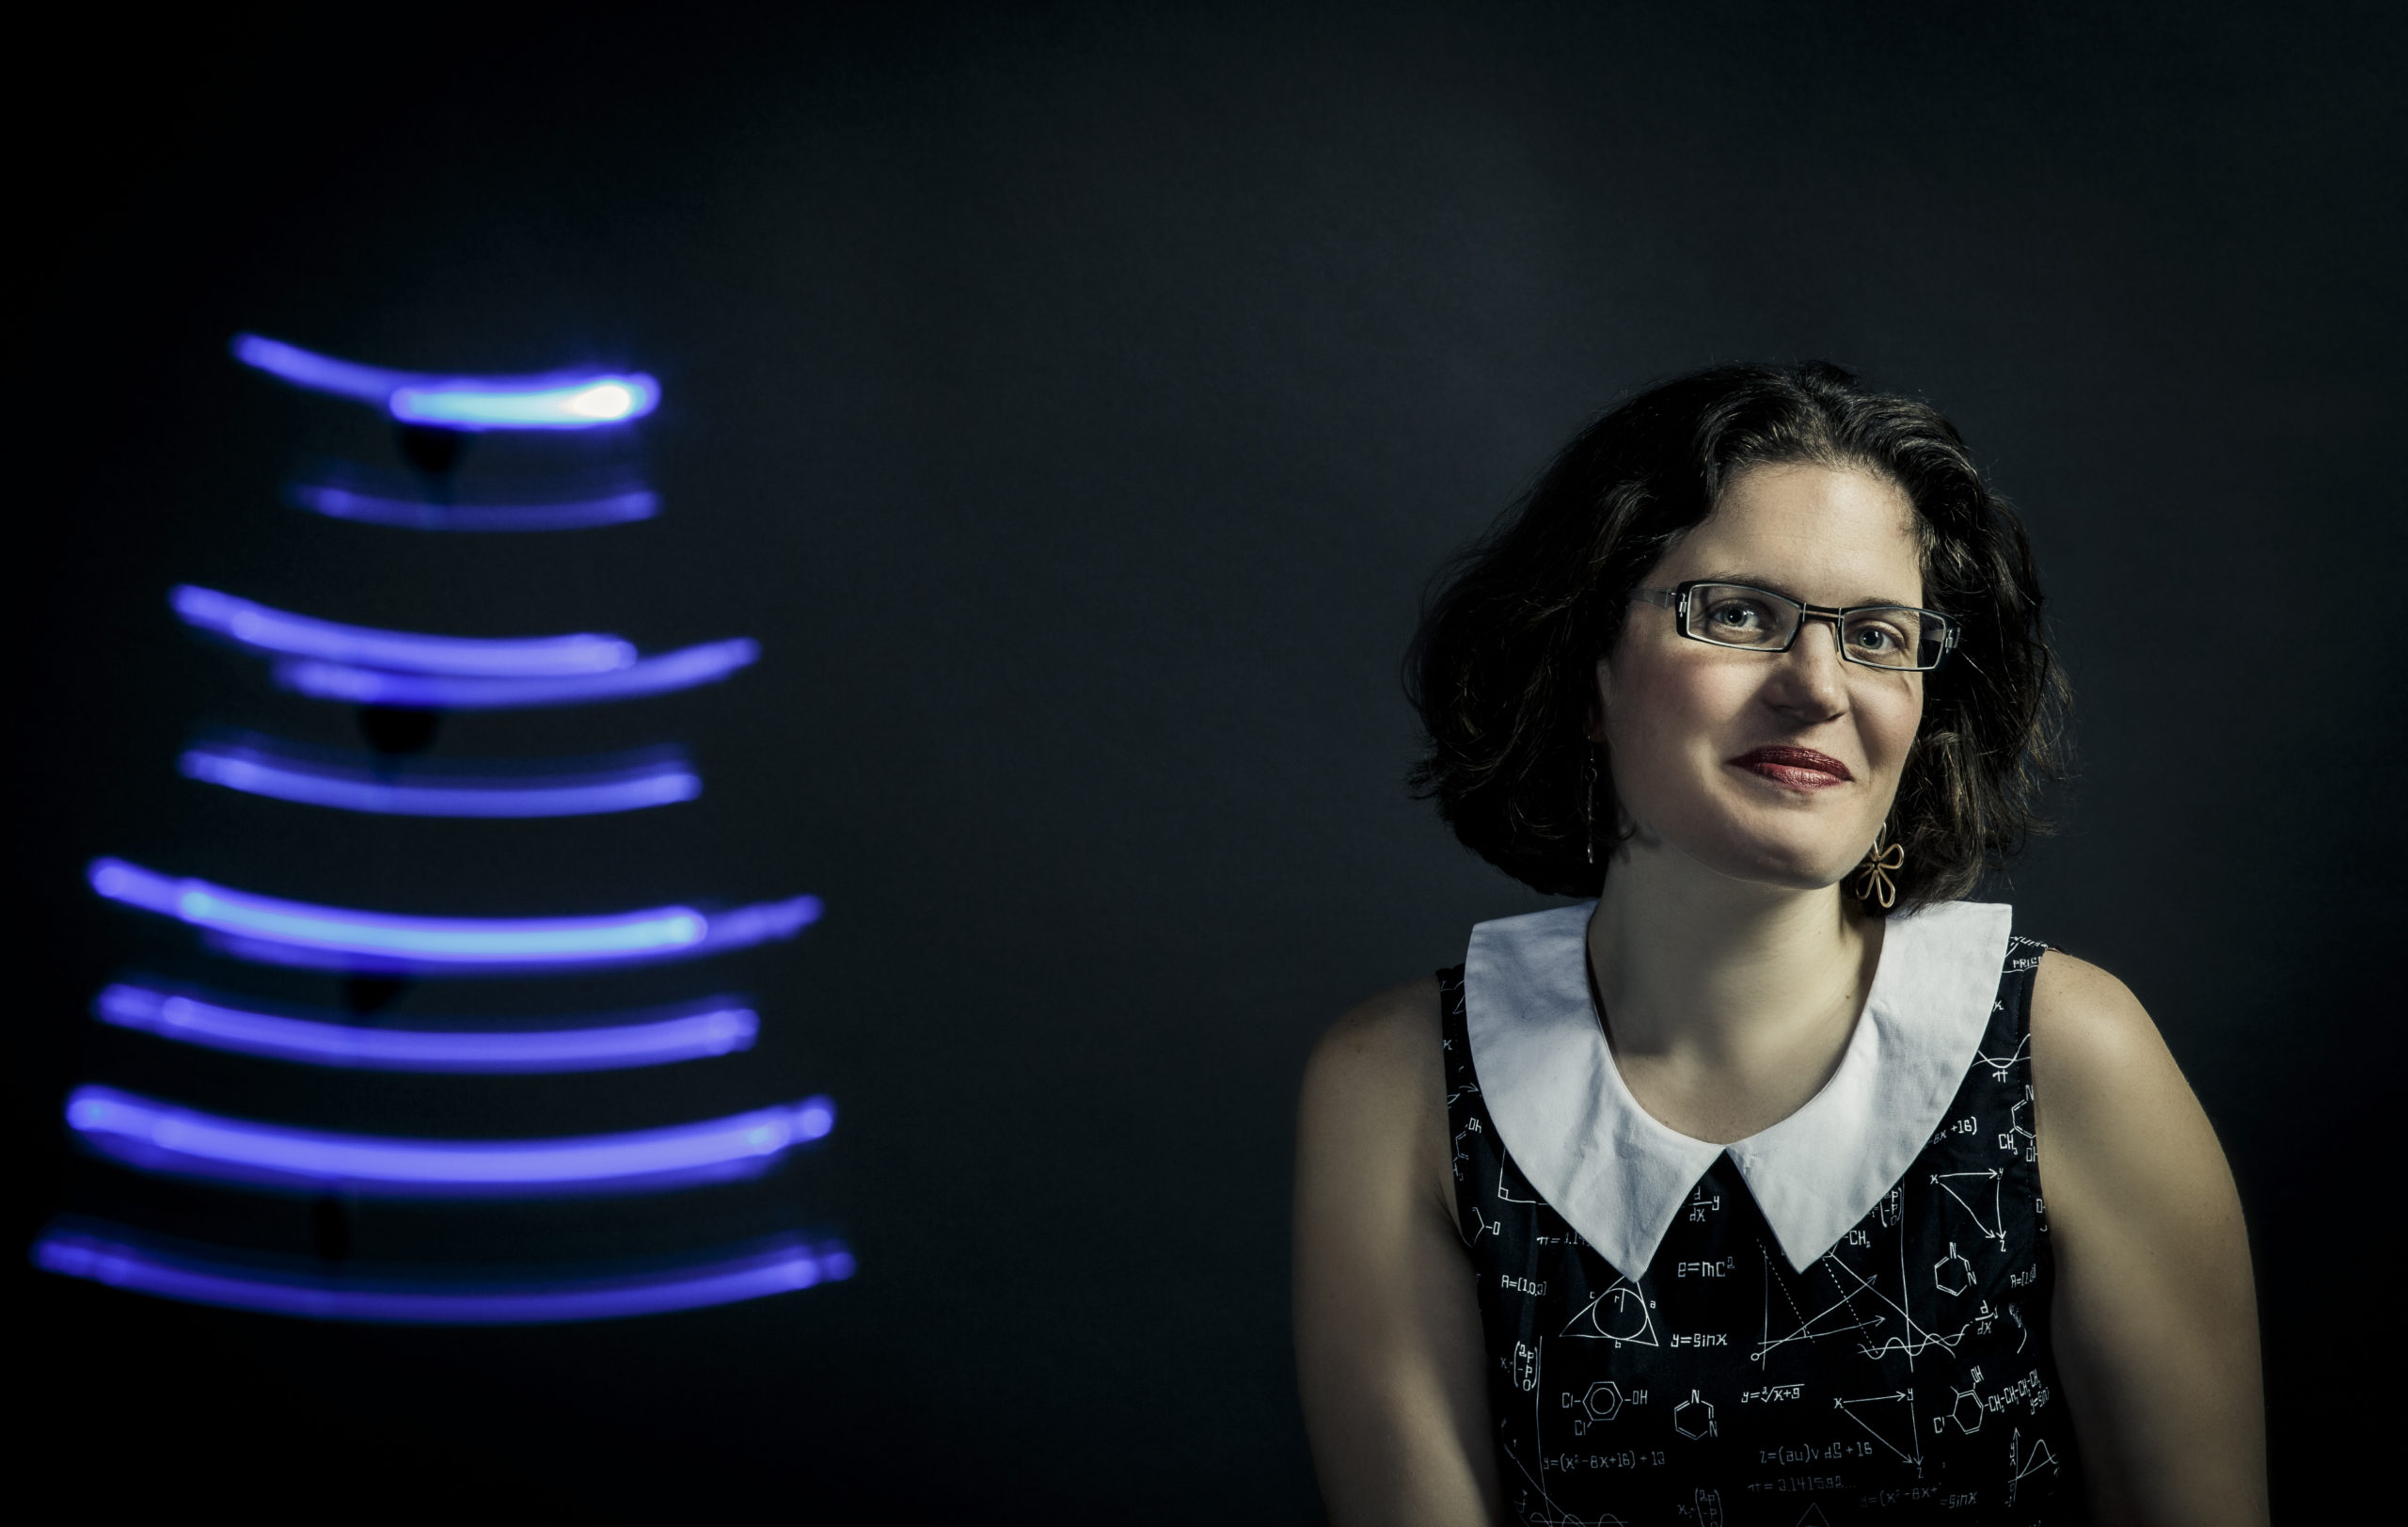 School of Engineering professor AnnMarie Thomas poses for a studio portrait with light-painted tracks made by LEDs March 3, 2015. Taken for the School of Engineering newsletter. Thomas often explores play concepts as a way of teaching engineering.